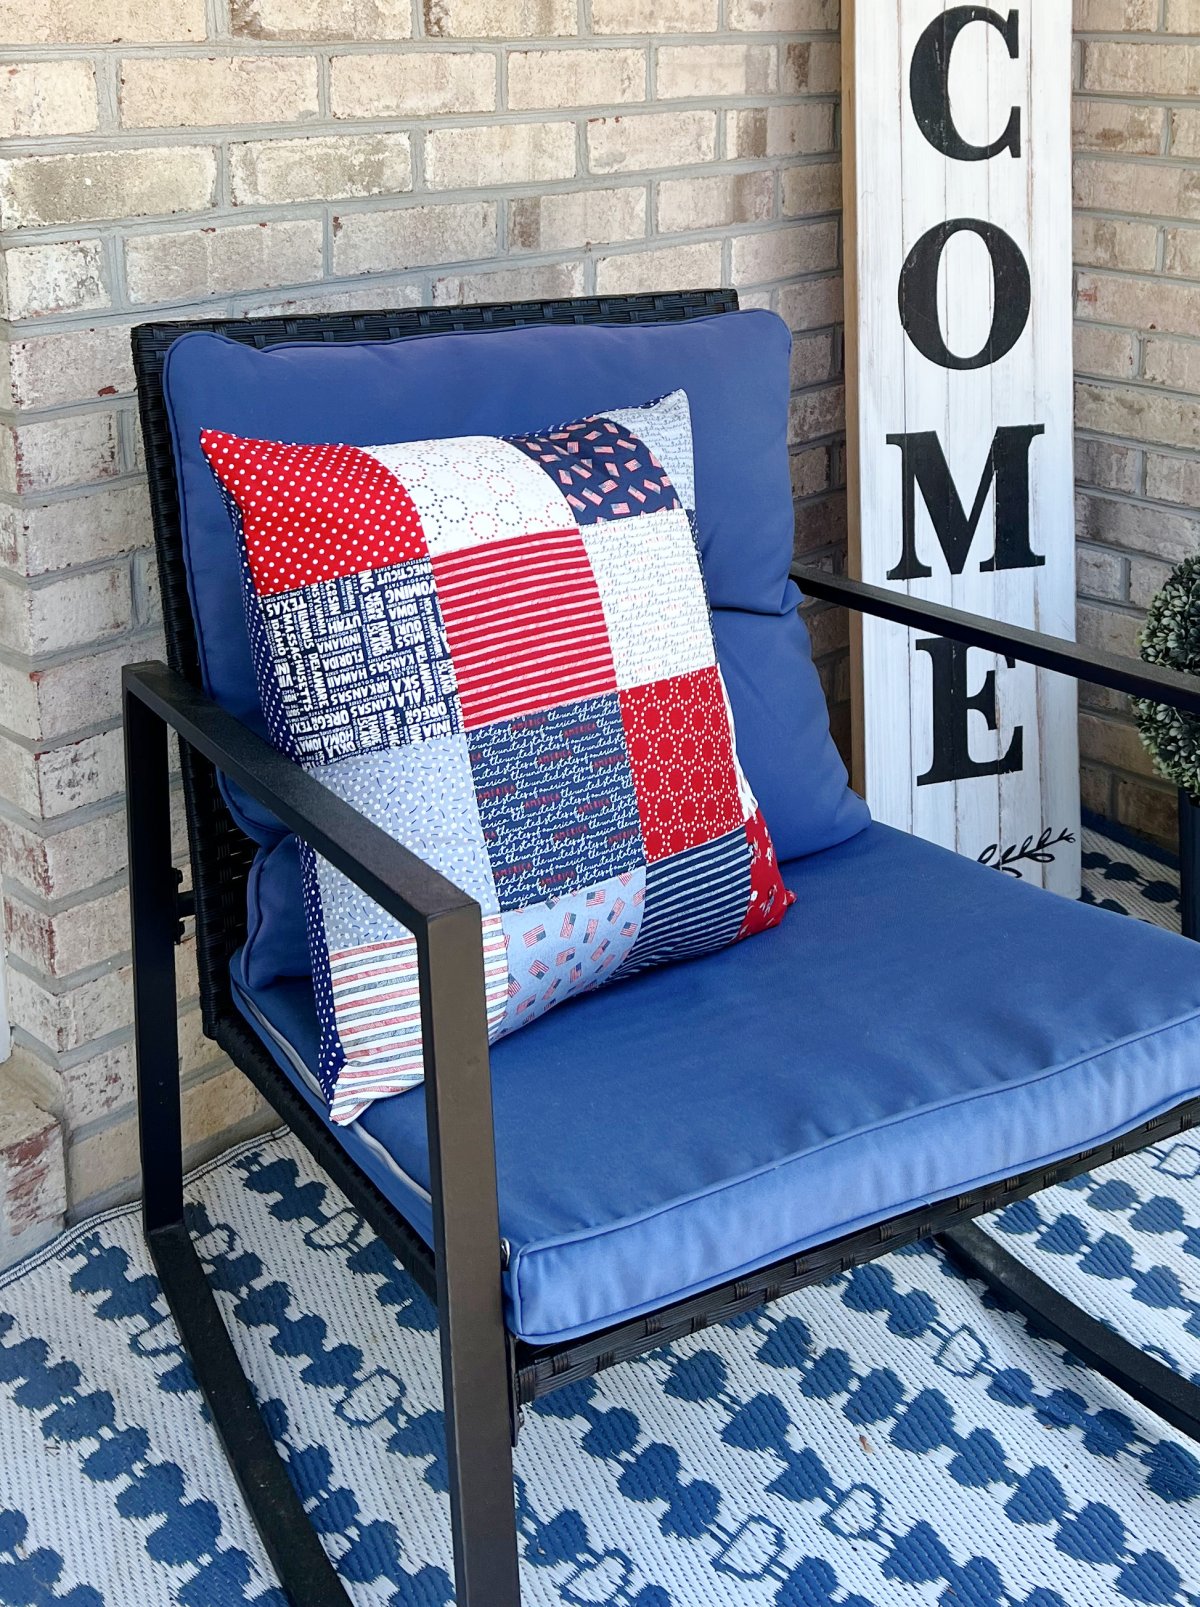 Image contains a square patchwork pillow made from red, white, and blue fabric sitting on a blue outdoor rocking chair.